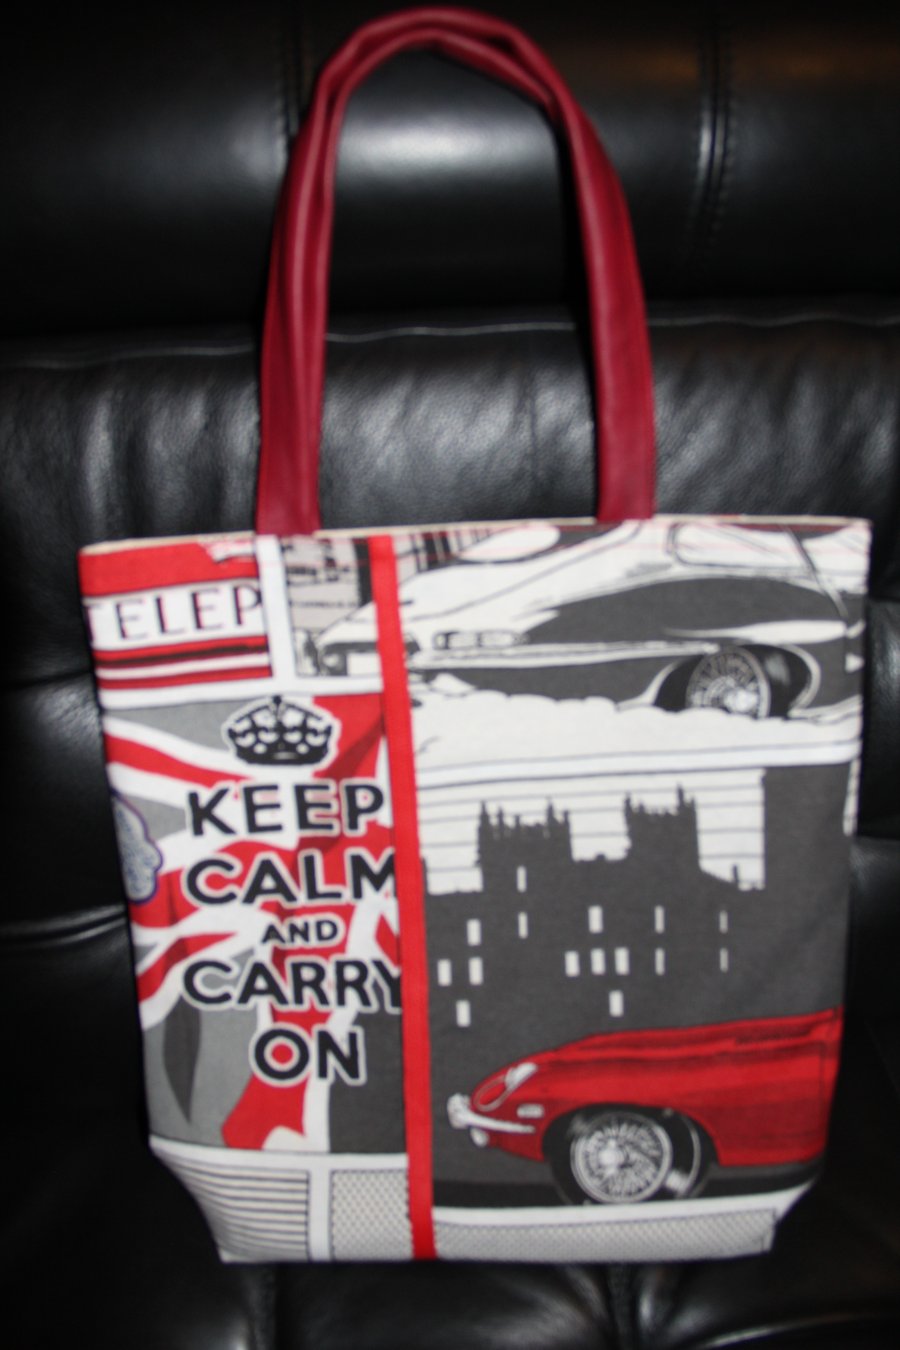 Keep Calm and Carry On, Red and Black London Street Scene Tote Bag